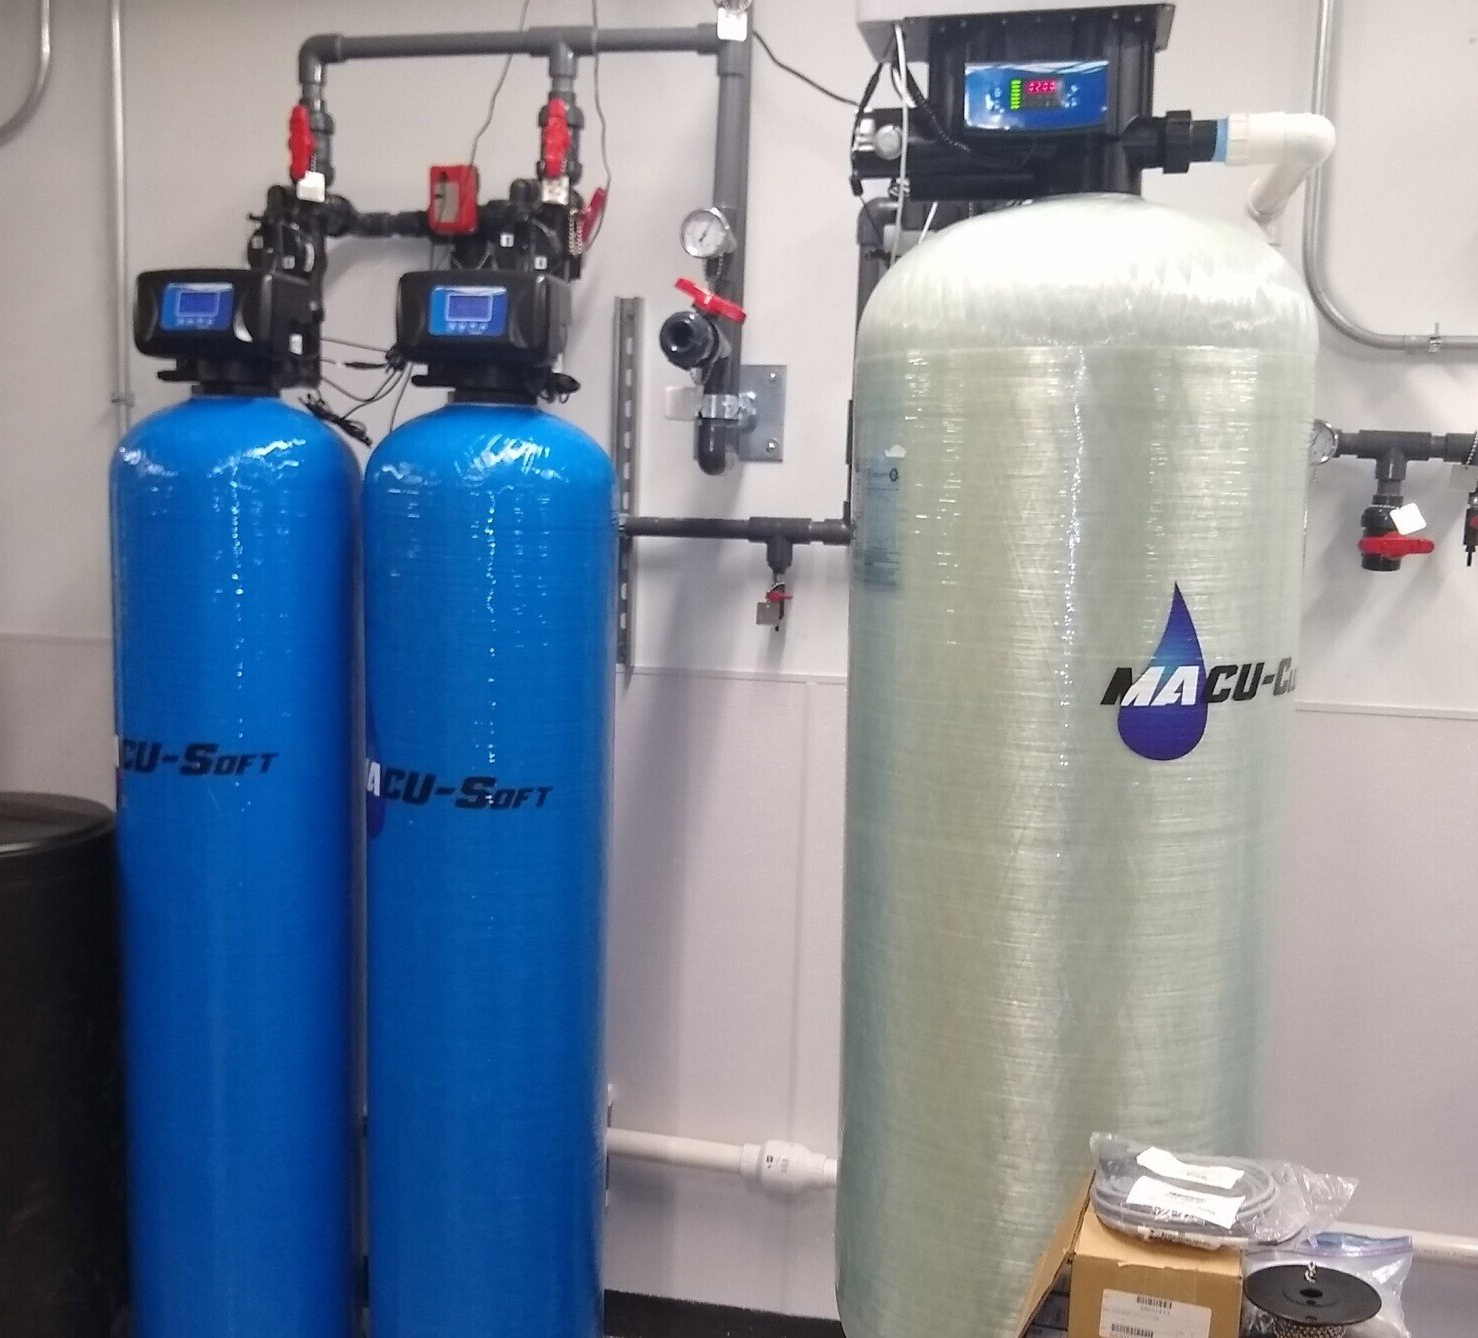 macu-soft water softener system